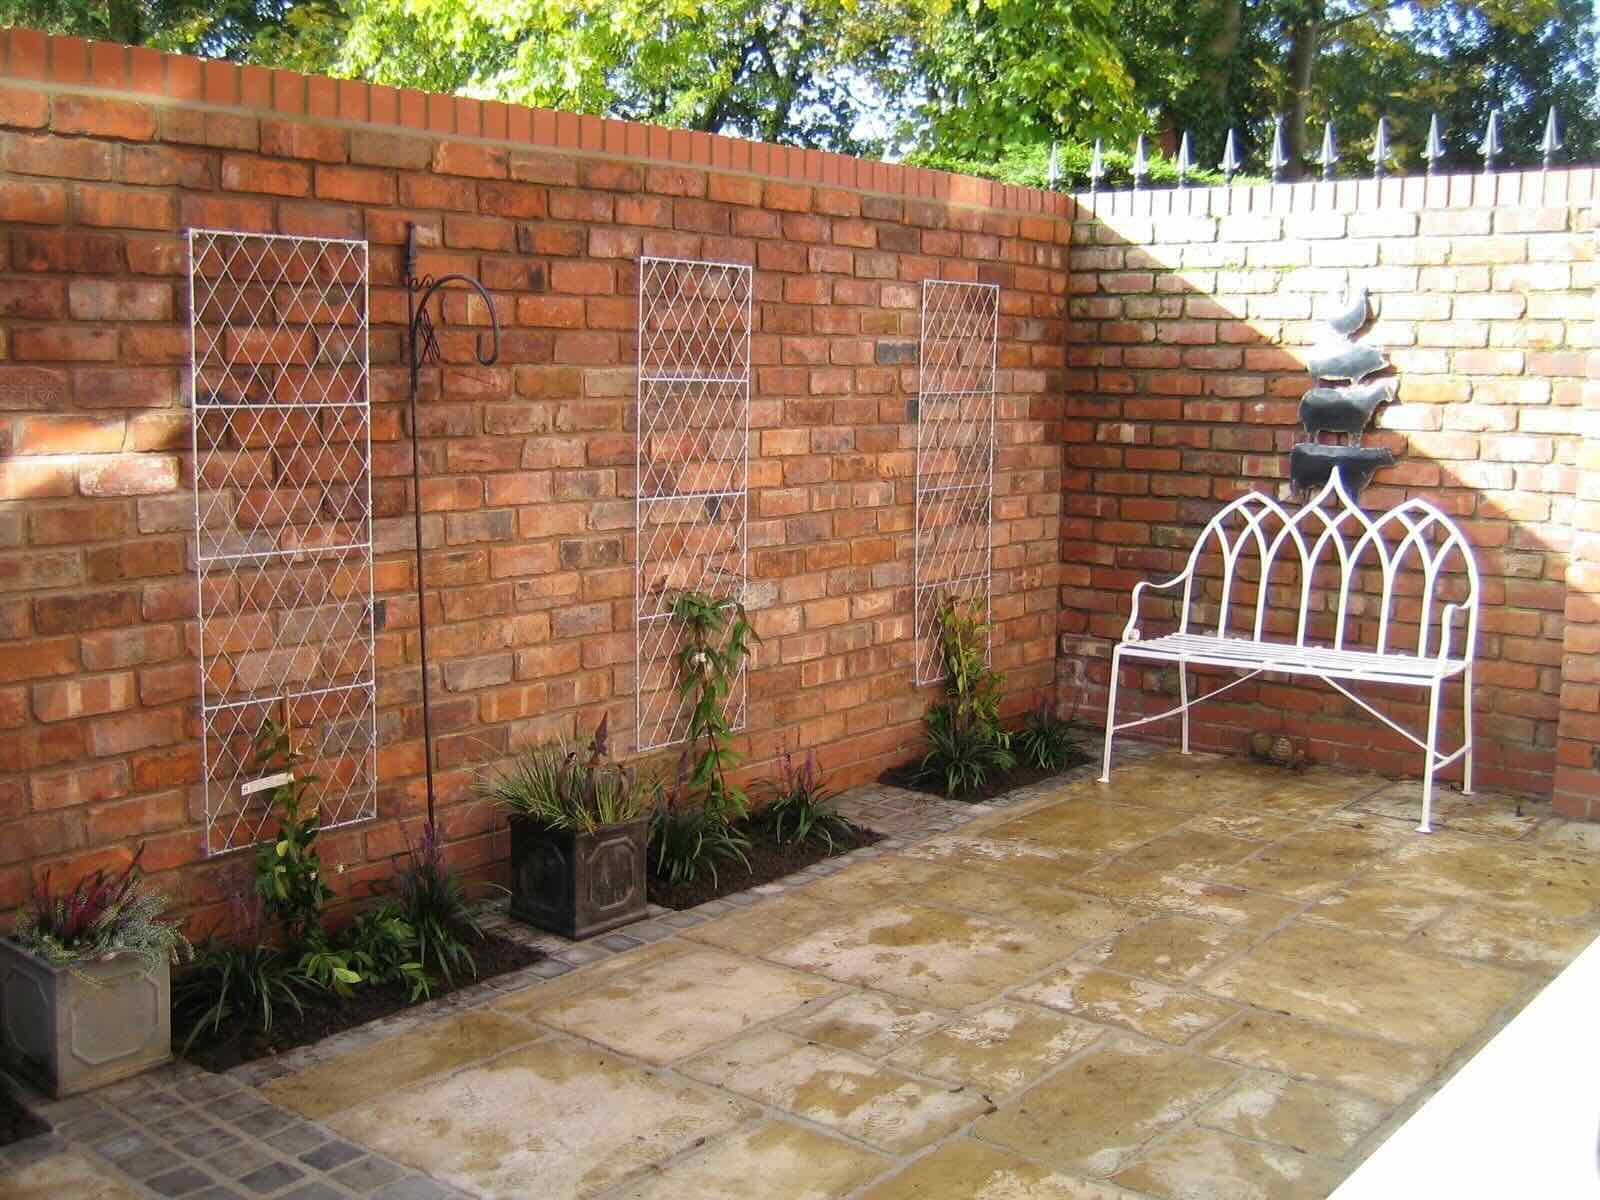 How To Build A Brick Wall In The Garden